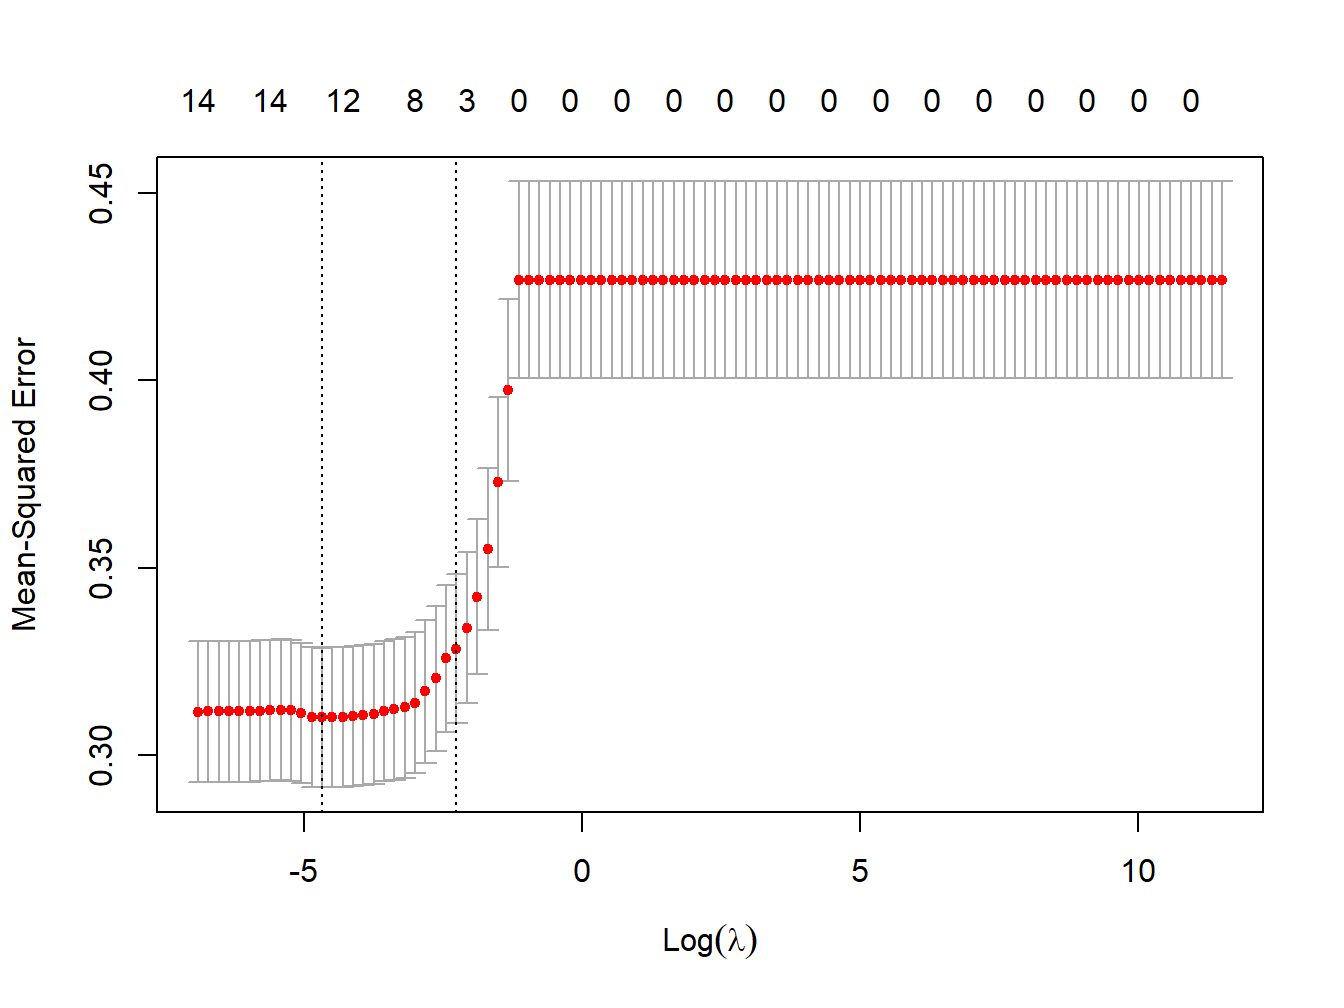 MSE vs lambda for lasso regression in the simulated dataset